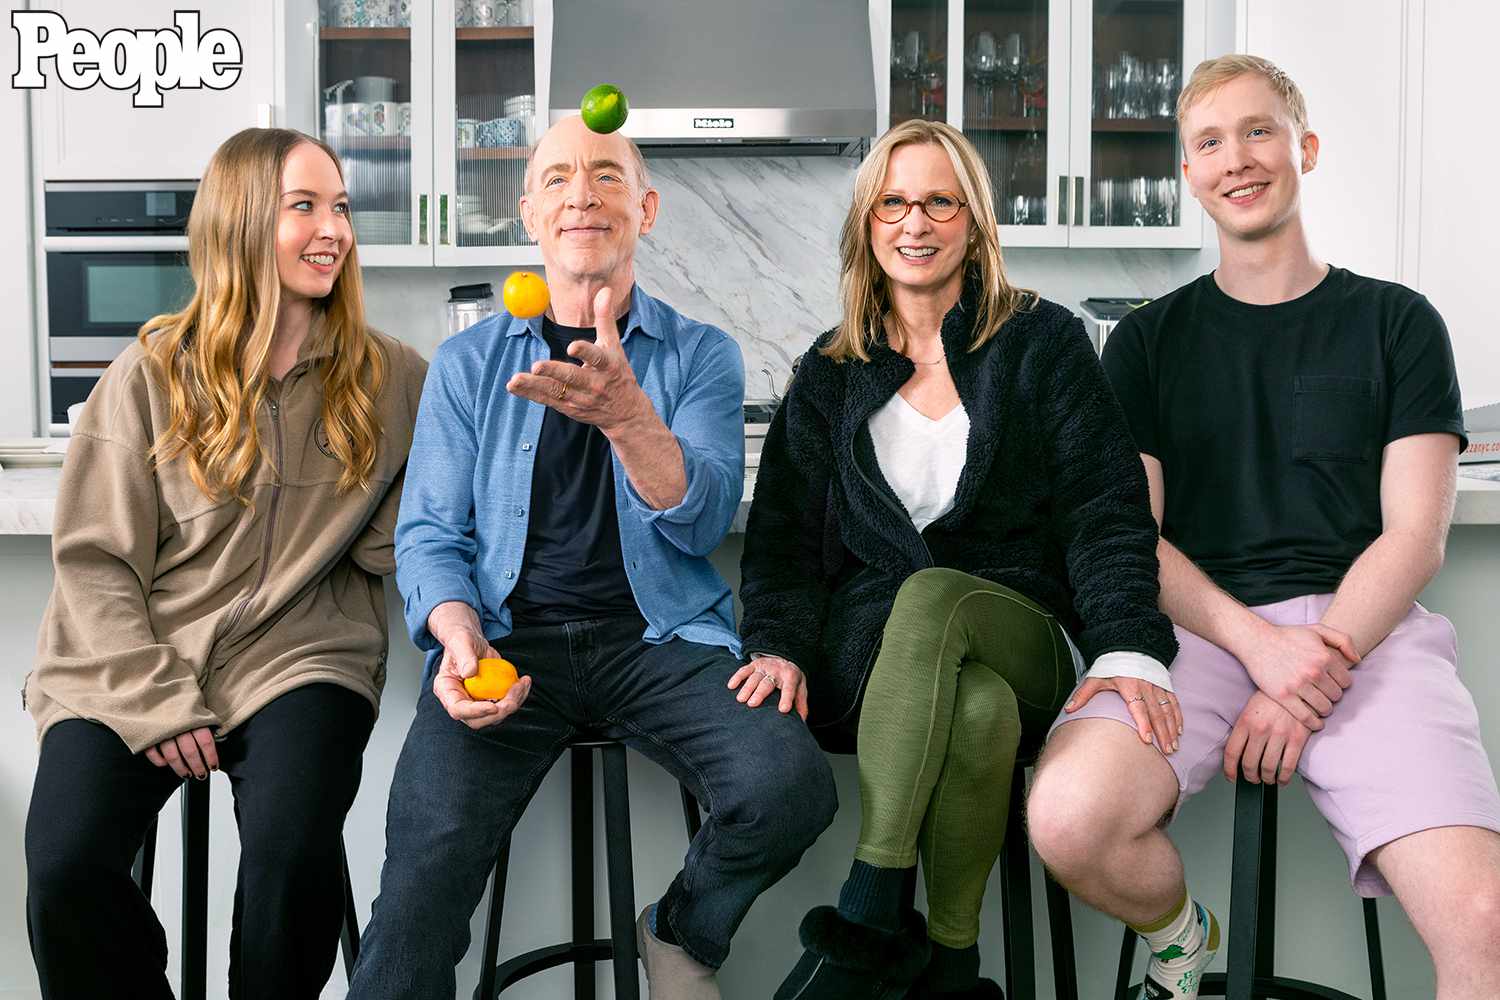 J.K. Simmons and His Family 'Laughed a Lot' While Making a Movie Together — About a Serial Killer (Exclusive)